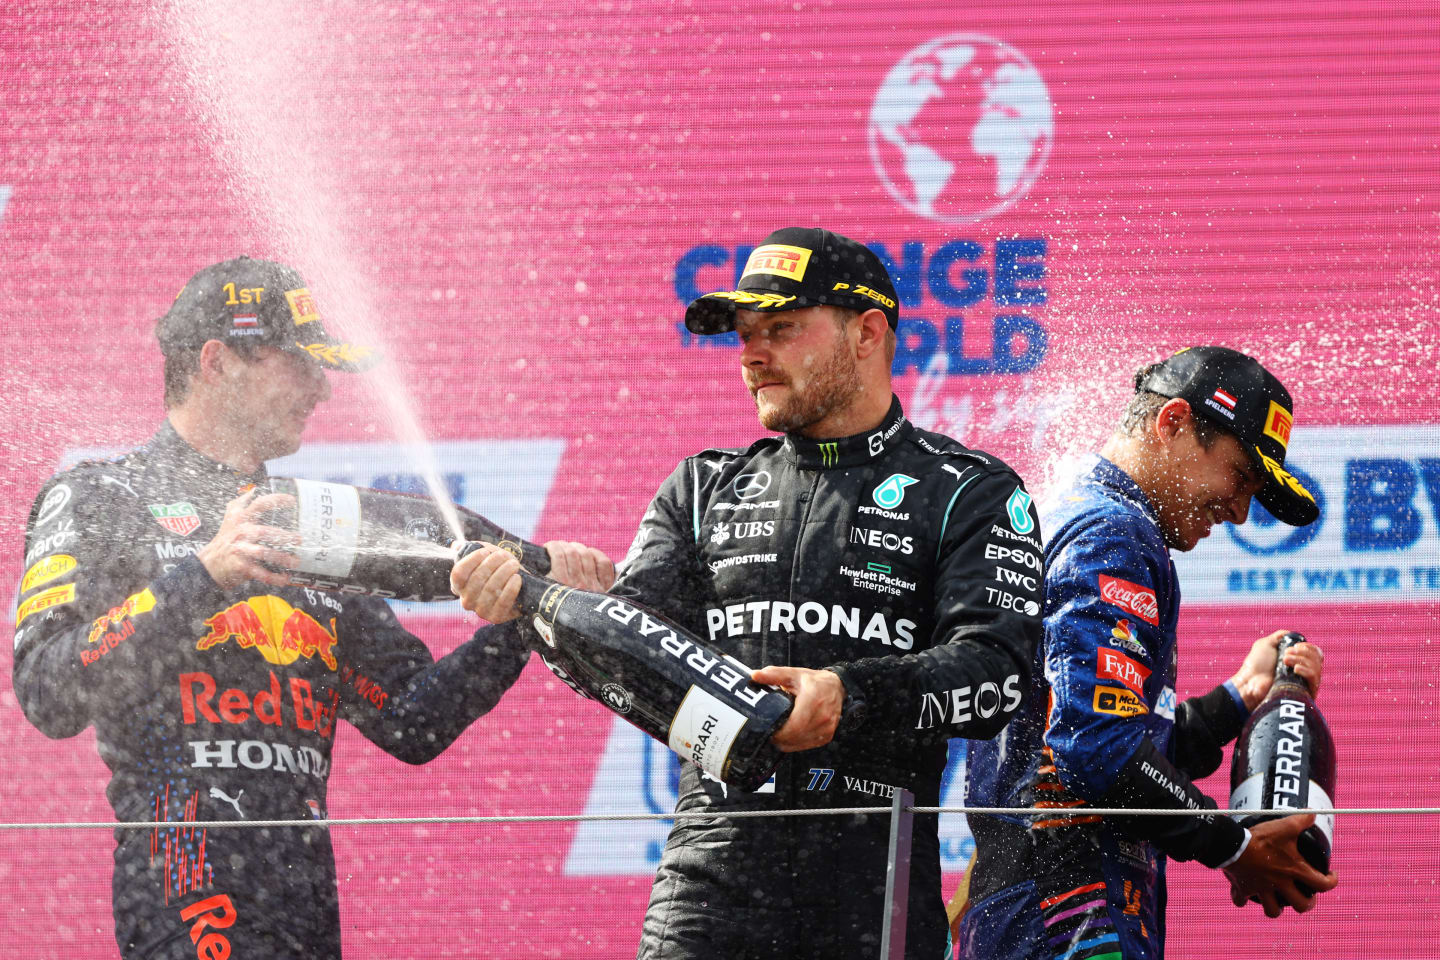 SPIELBERG, AUSTRIA - JULY 04: Second placed Valtteri Bottas of Finland and Mercedes GP celebrates on the podium during the F1 Grand Prix of Austria at Red Bull Ring on July 04, 2021 in Spielberg, Austria. (Photo by Bryn Lennon/Getty Images)